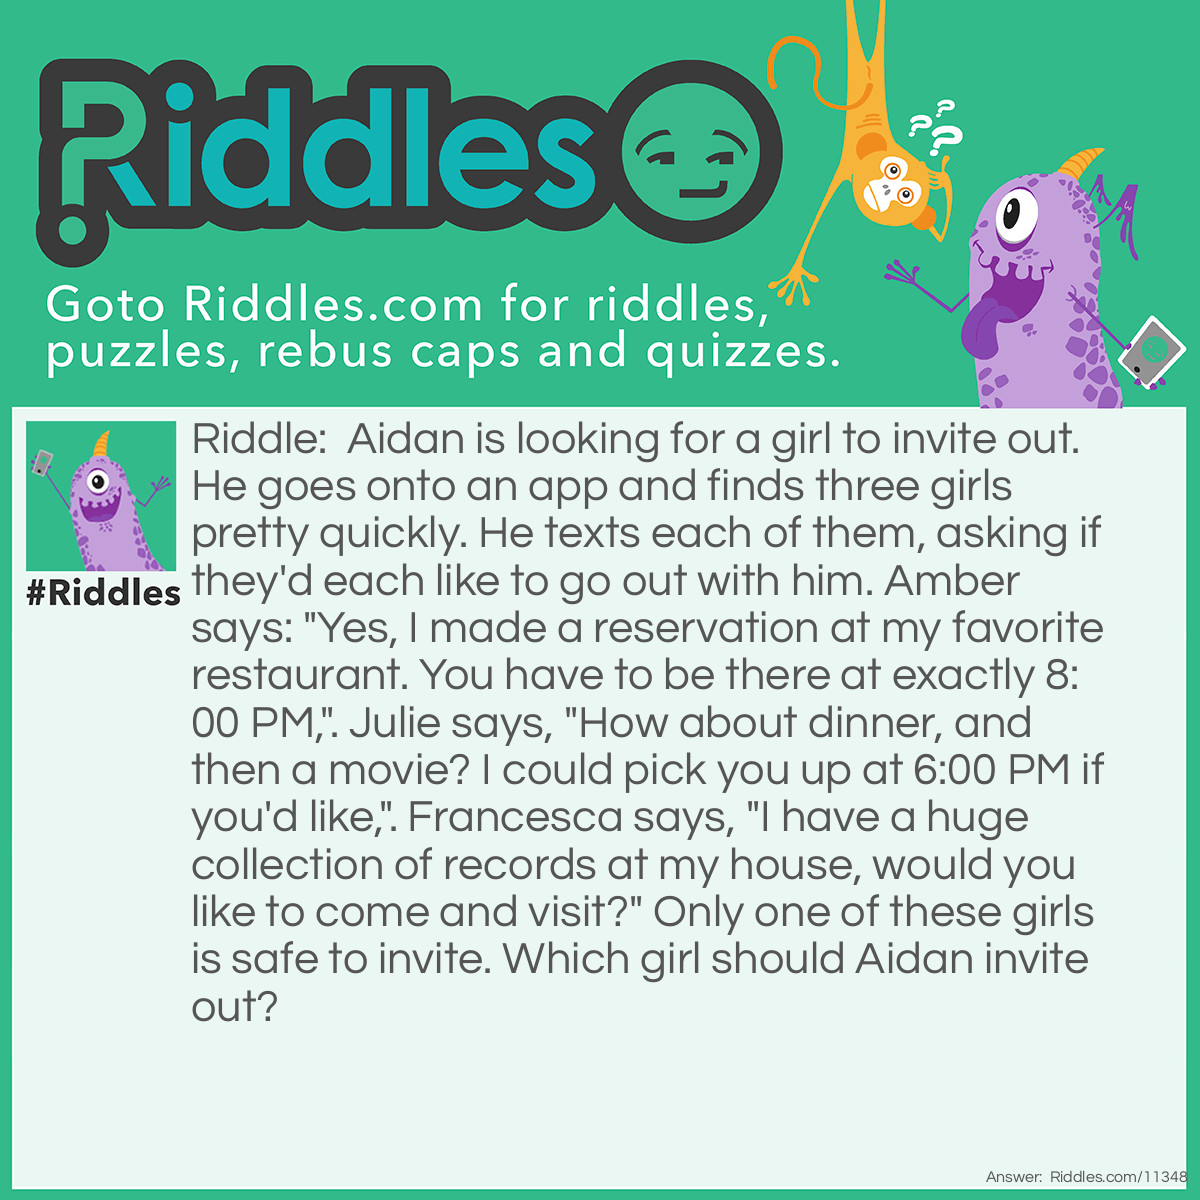 Riddle: Aidan is looking for a girl to invite out. He goes onto an app and finds three girls pretty quickly. He texts each of them, asking if they'd each like to go out with him. Amber says: "Yes, I made a reservation at my favorite restaurant. You have to be there at exactly 8:00 PM,". Julie says, "How about dinner, and then a movie? I could pick you up at 6:00 PM if you'd like,". Francesca says, "I have a huge collection of records at my house, would you like to come and visit?" Only one of these girls is safe to invite. Which girl should Aidan invite out? Answer: Aidan should invite Julie out. Amber didn't even ask if Aidan wanted to go to the restaurant or not. Besides, she's too rude and bossy. Aidan barely knows Francesca; it's unsafe to go to her place alone. Aidan should go with Julie because she seems the safest and the most polite.